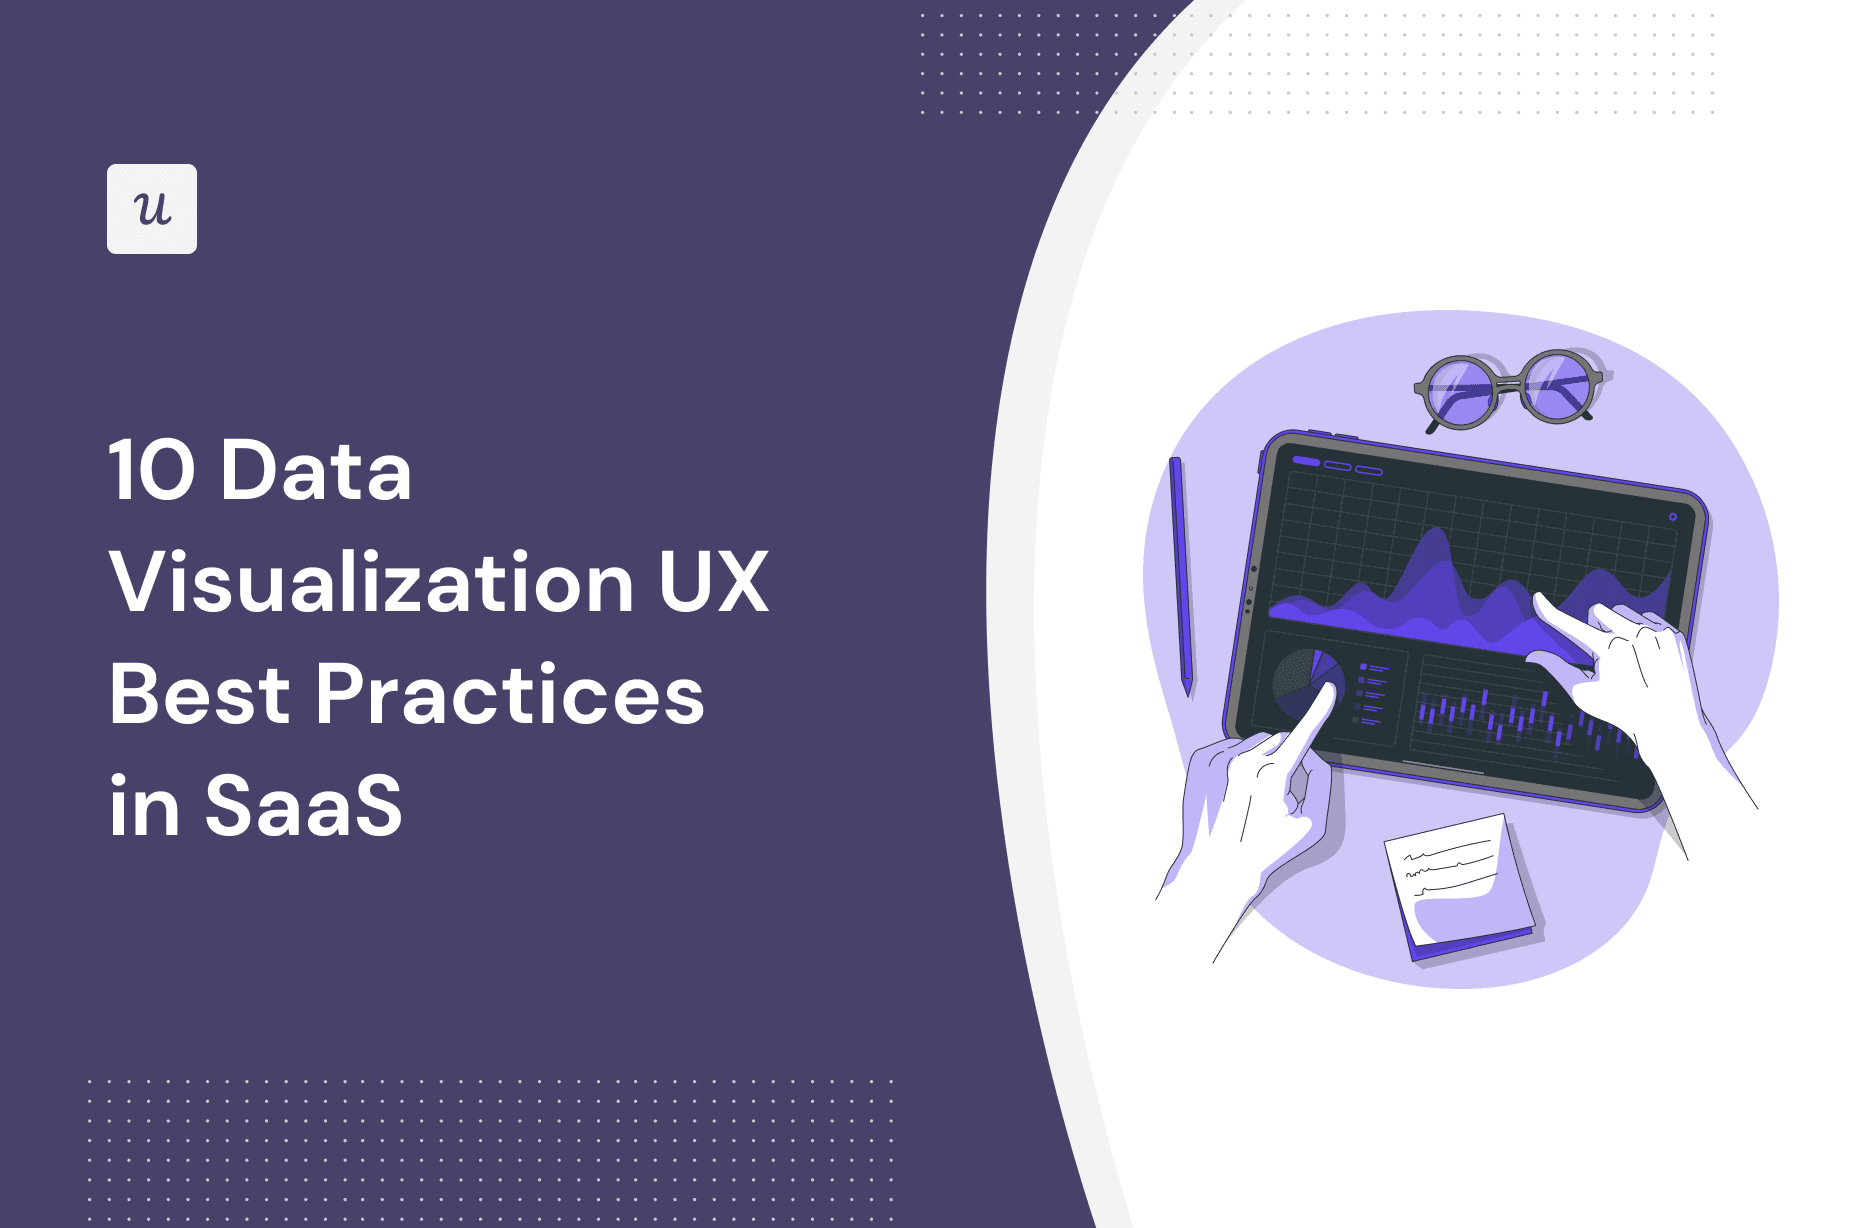 10 Data Visualization UX Best Practices in SaaS cover